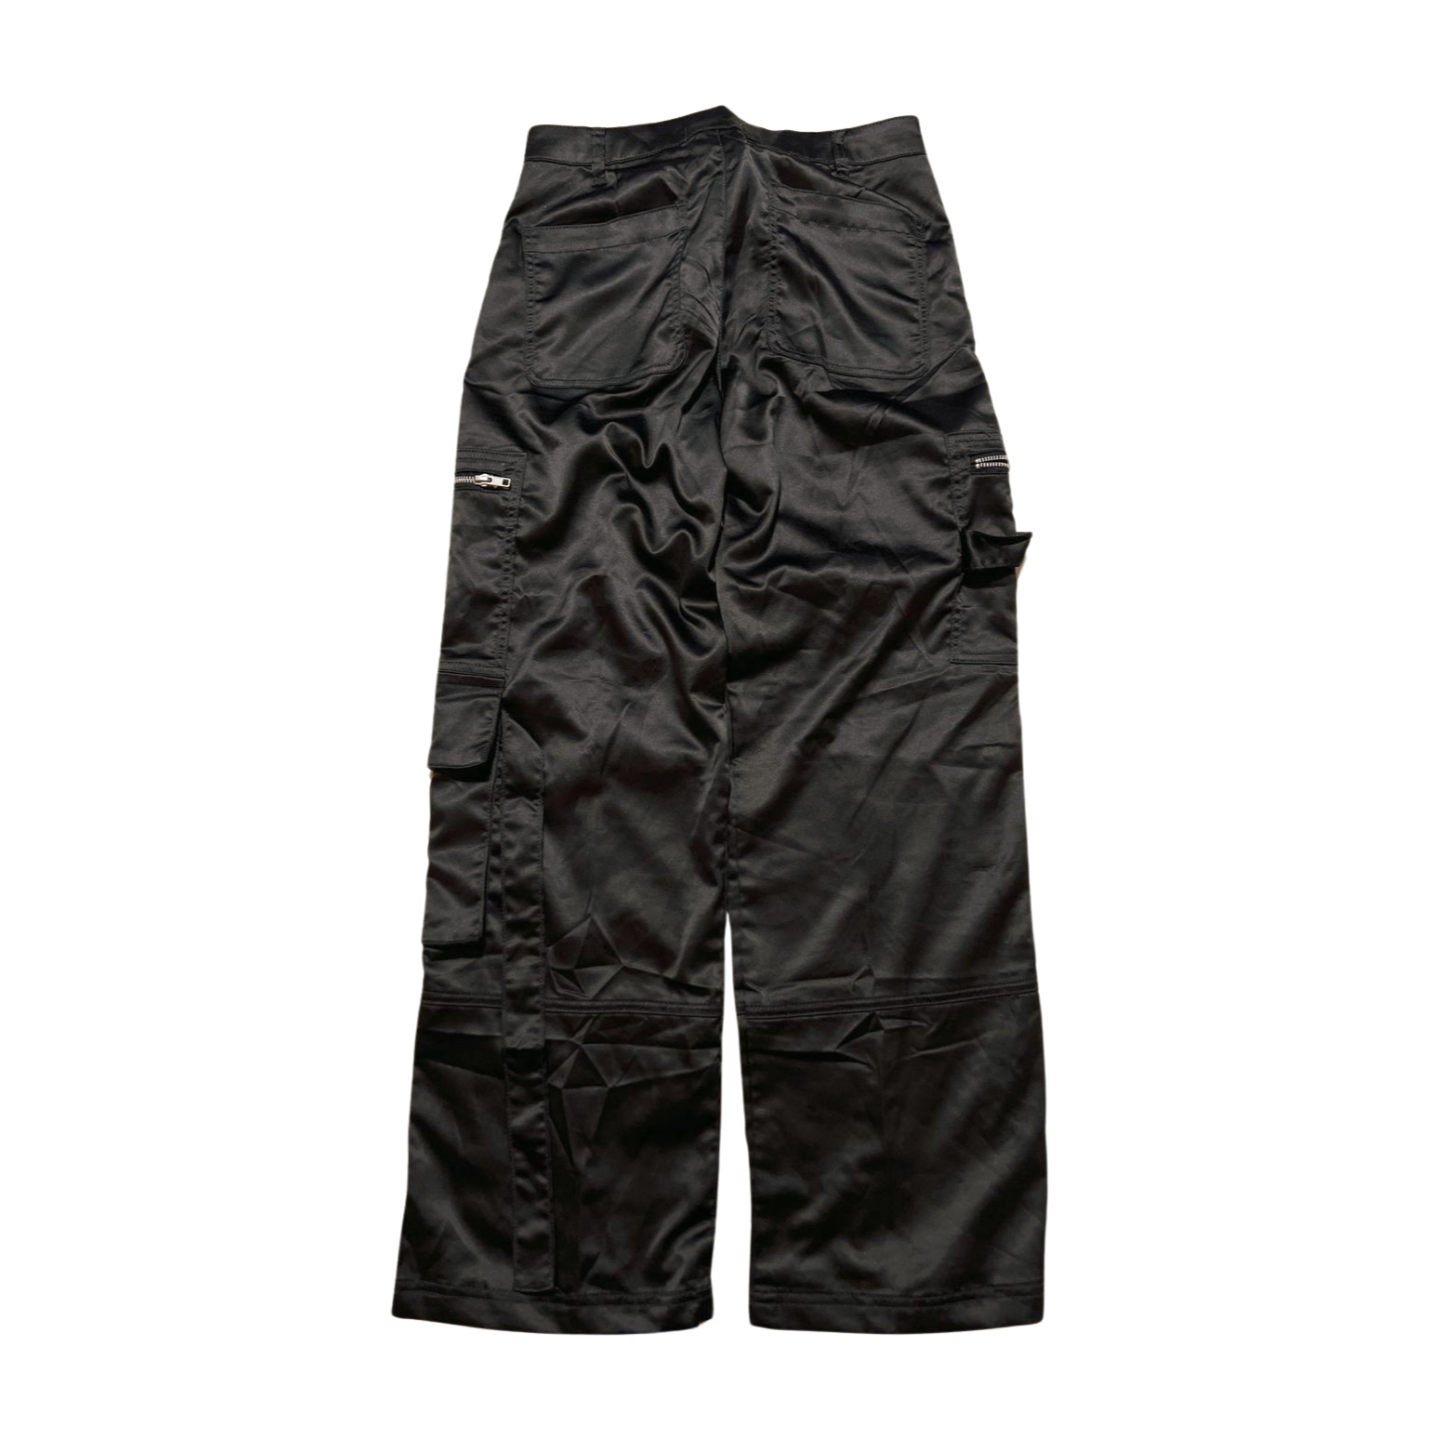 BDG Urban Outfitters New Y2K Womens Cargo Pants - OLIVE | Tillys